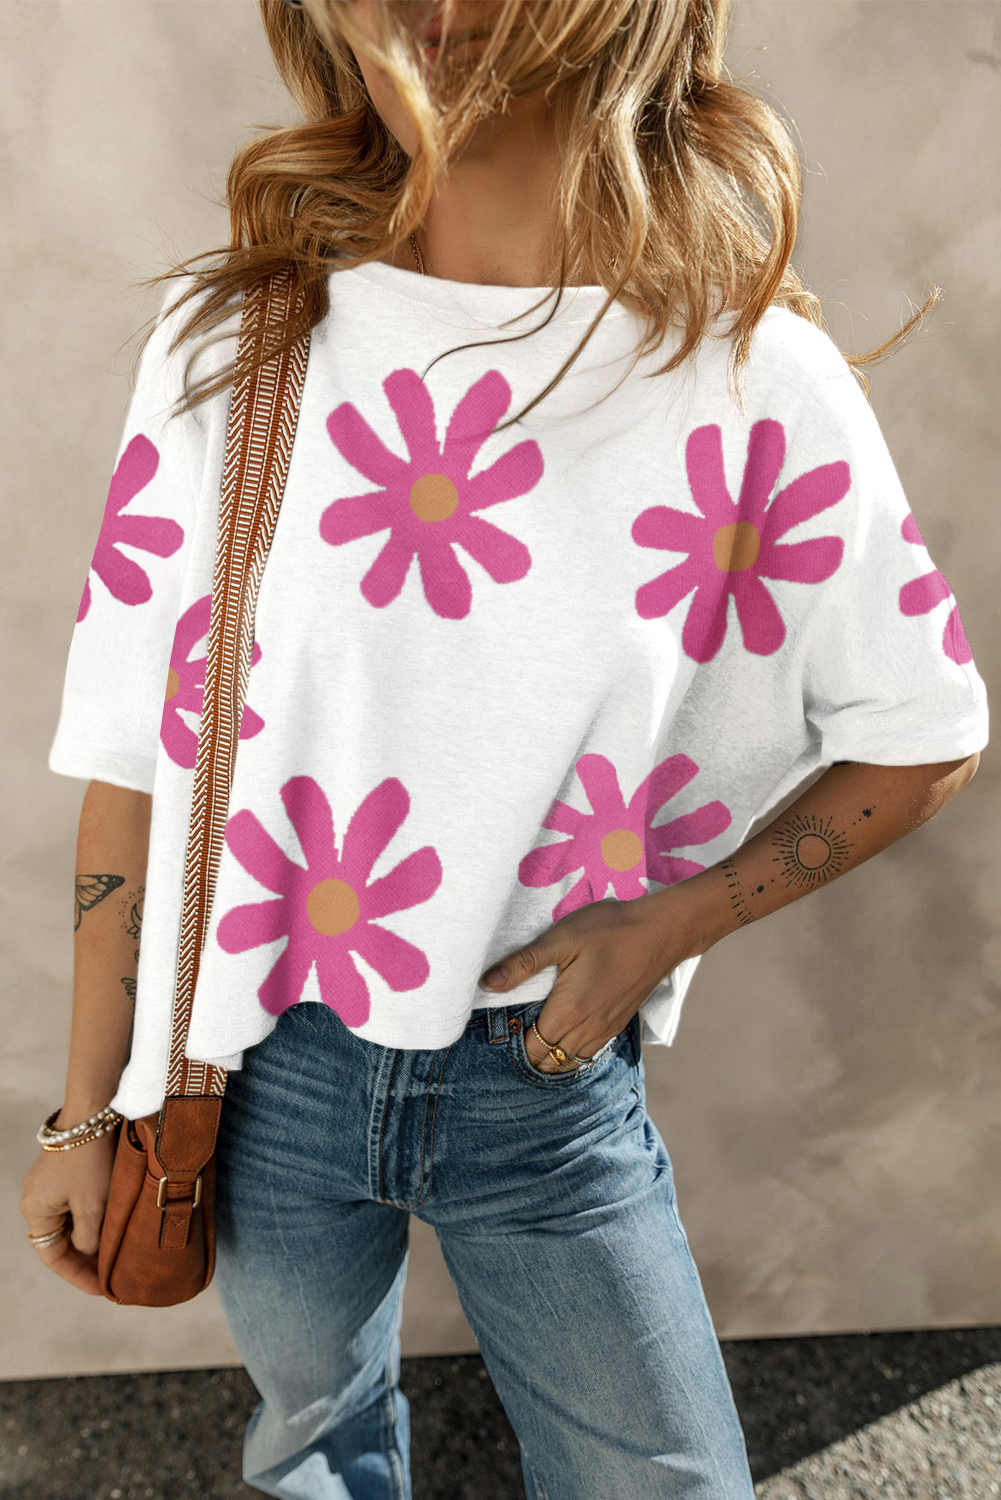 Shewin Wholesale High Quality White 60s Vintage FLOWER Print Batwing Sleeve T Shirt